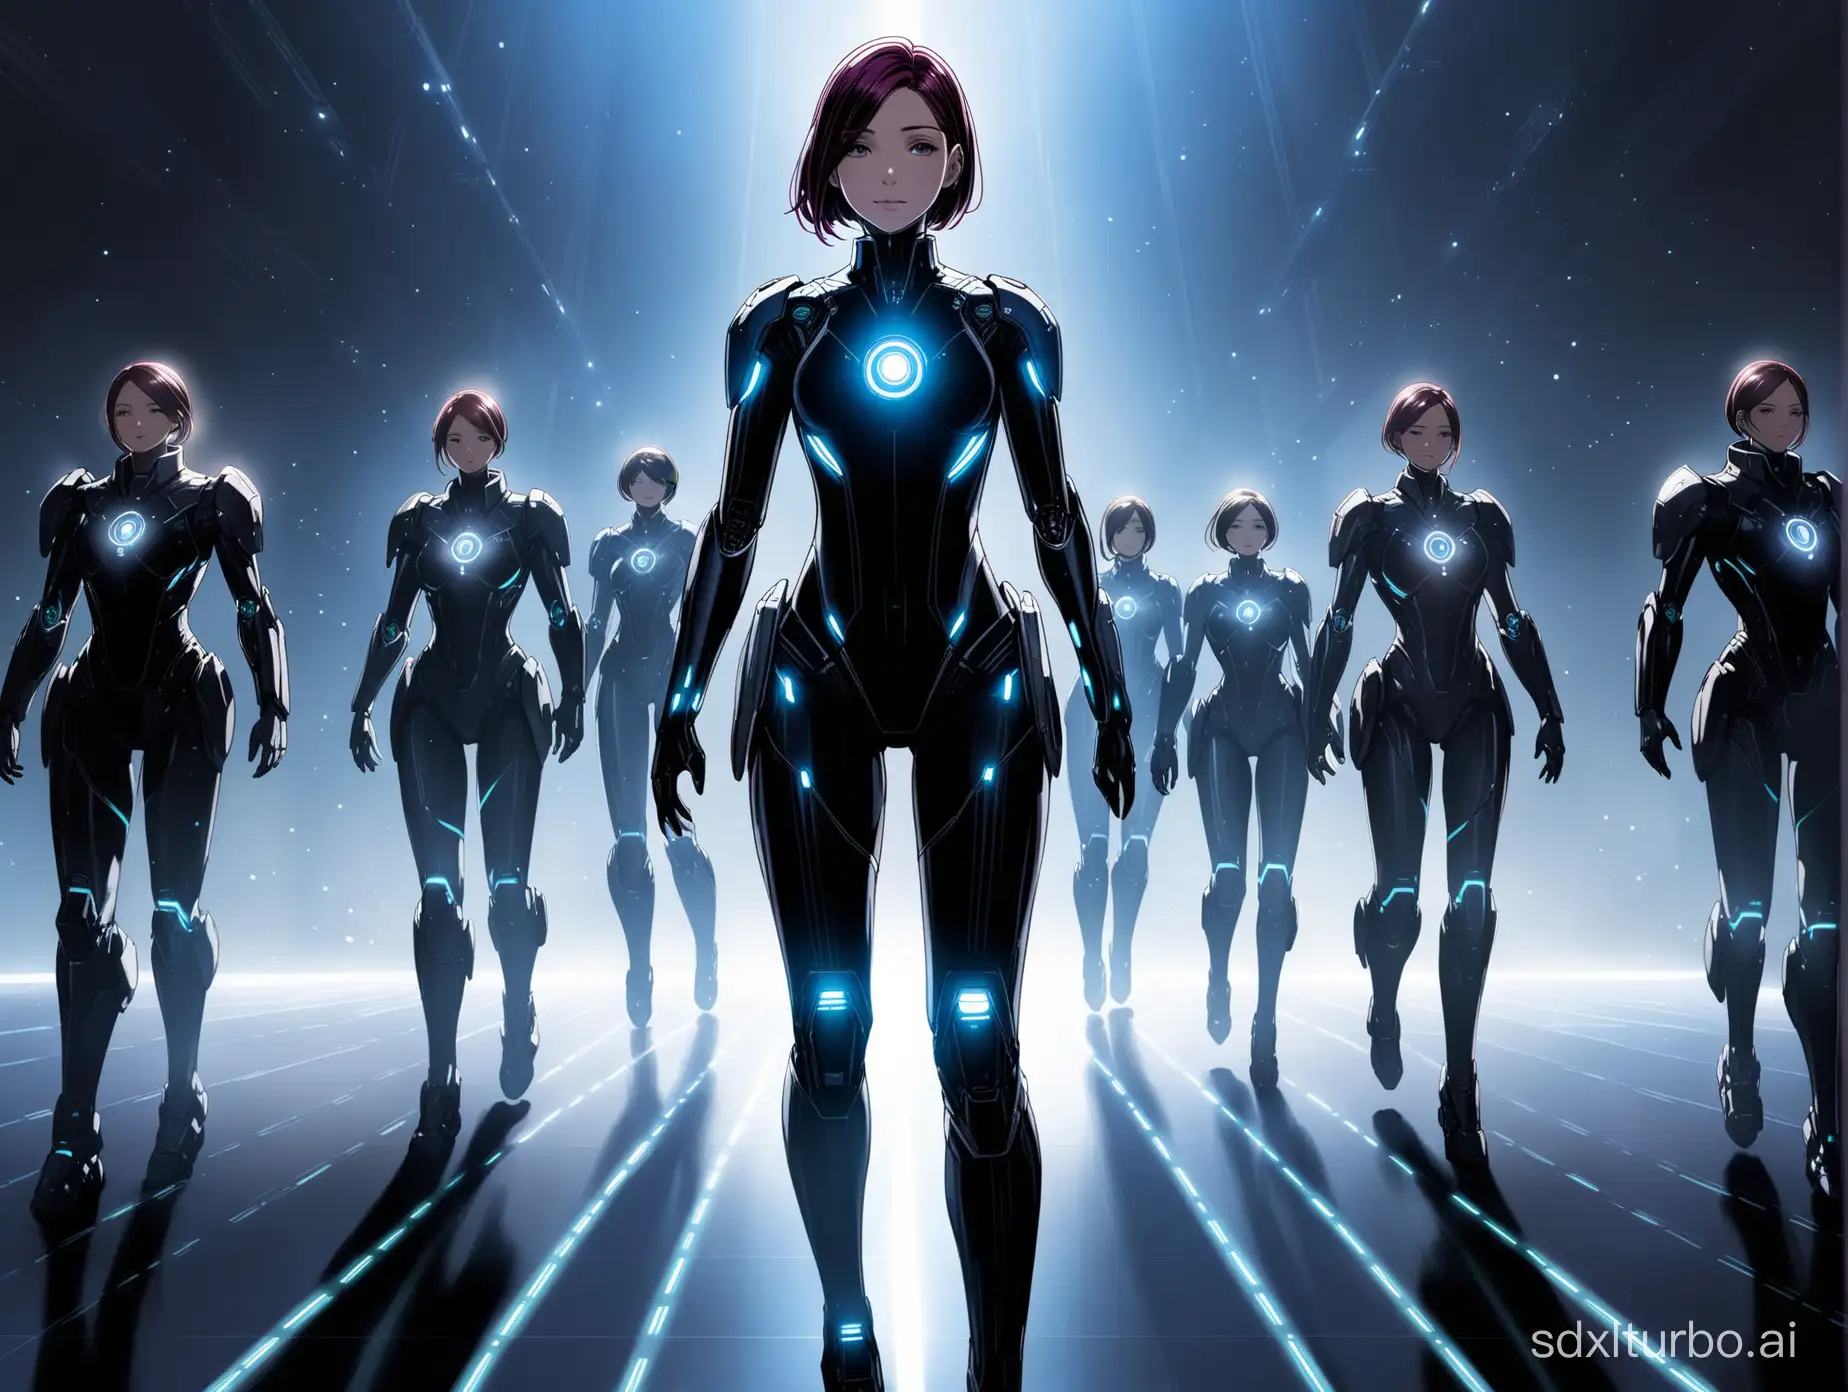 Ada and her fellow androids emerge from the shadows to embrace their newfound freedom. They contribute their unique talents and perspectives to society, enriching the world with their presence.